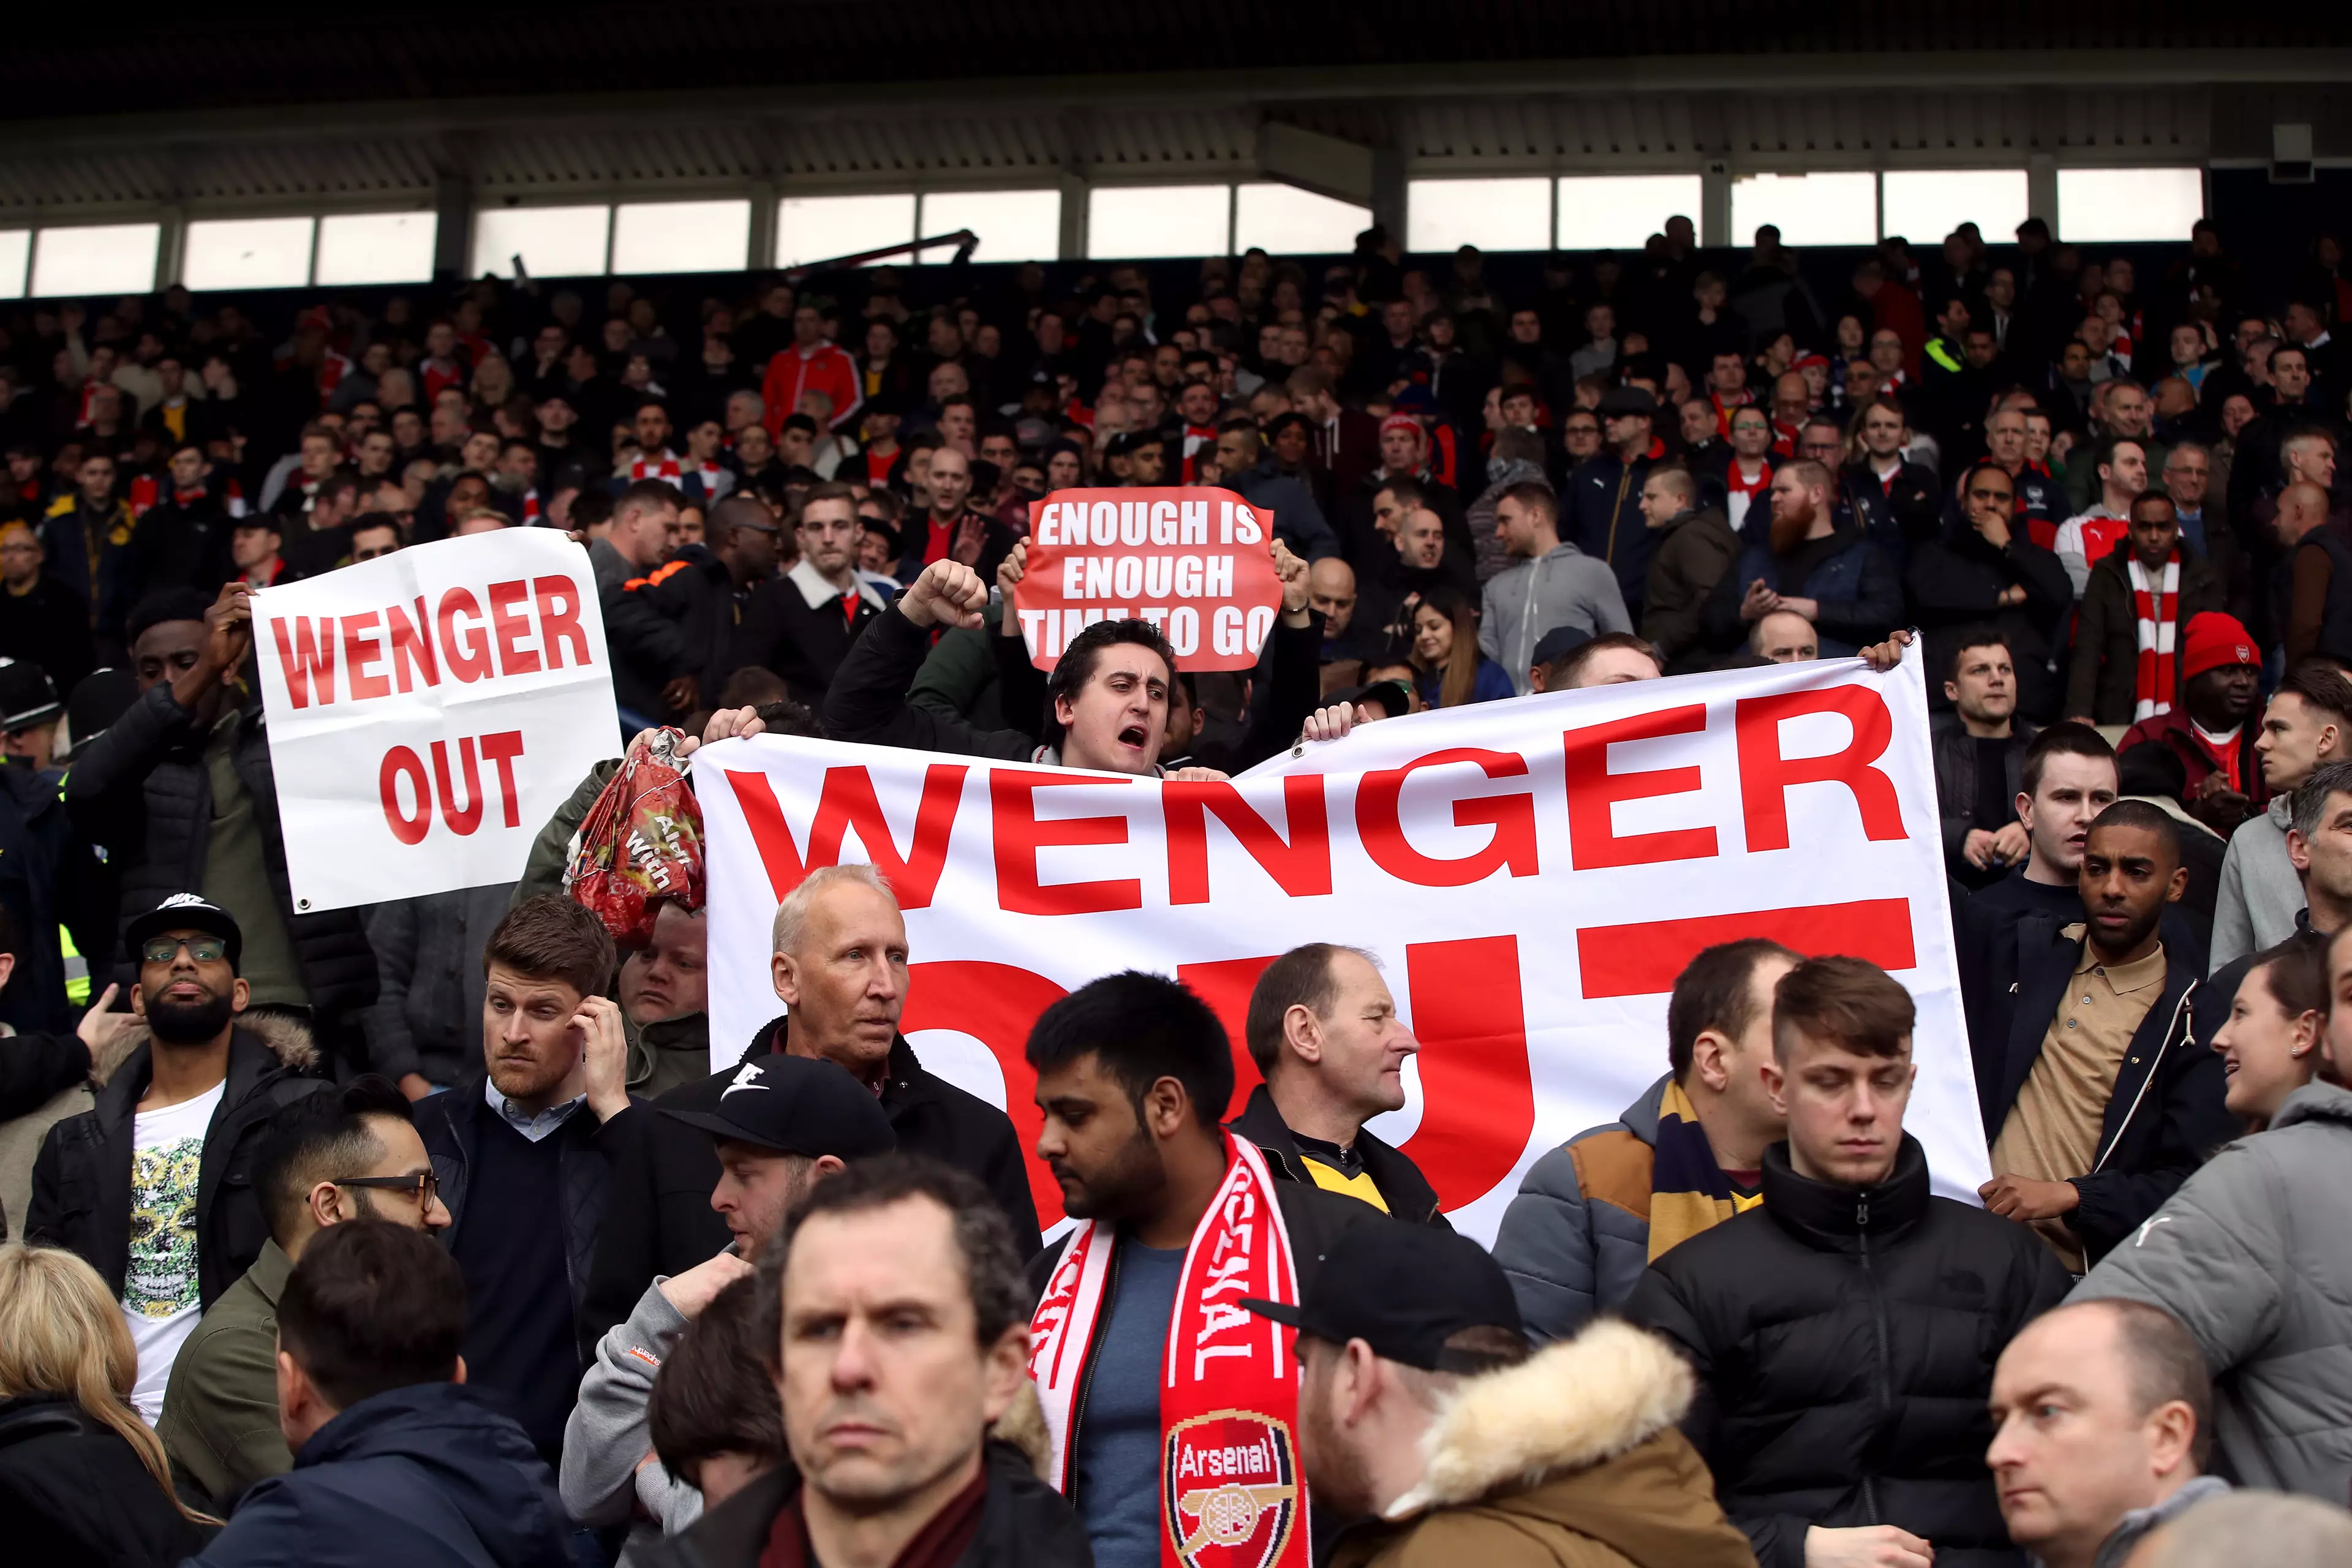 Wenger out signs started to follow the team everywhere. Image: PA Images